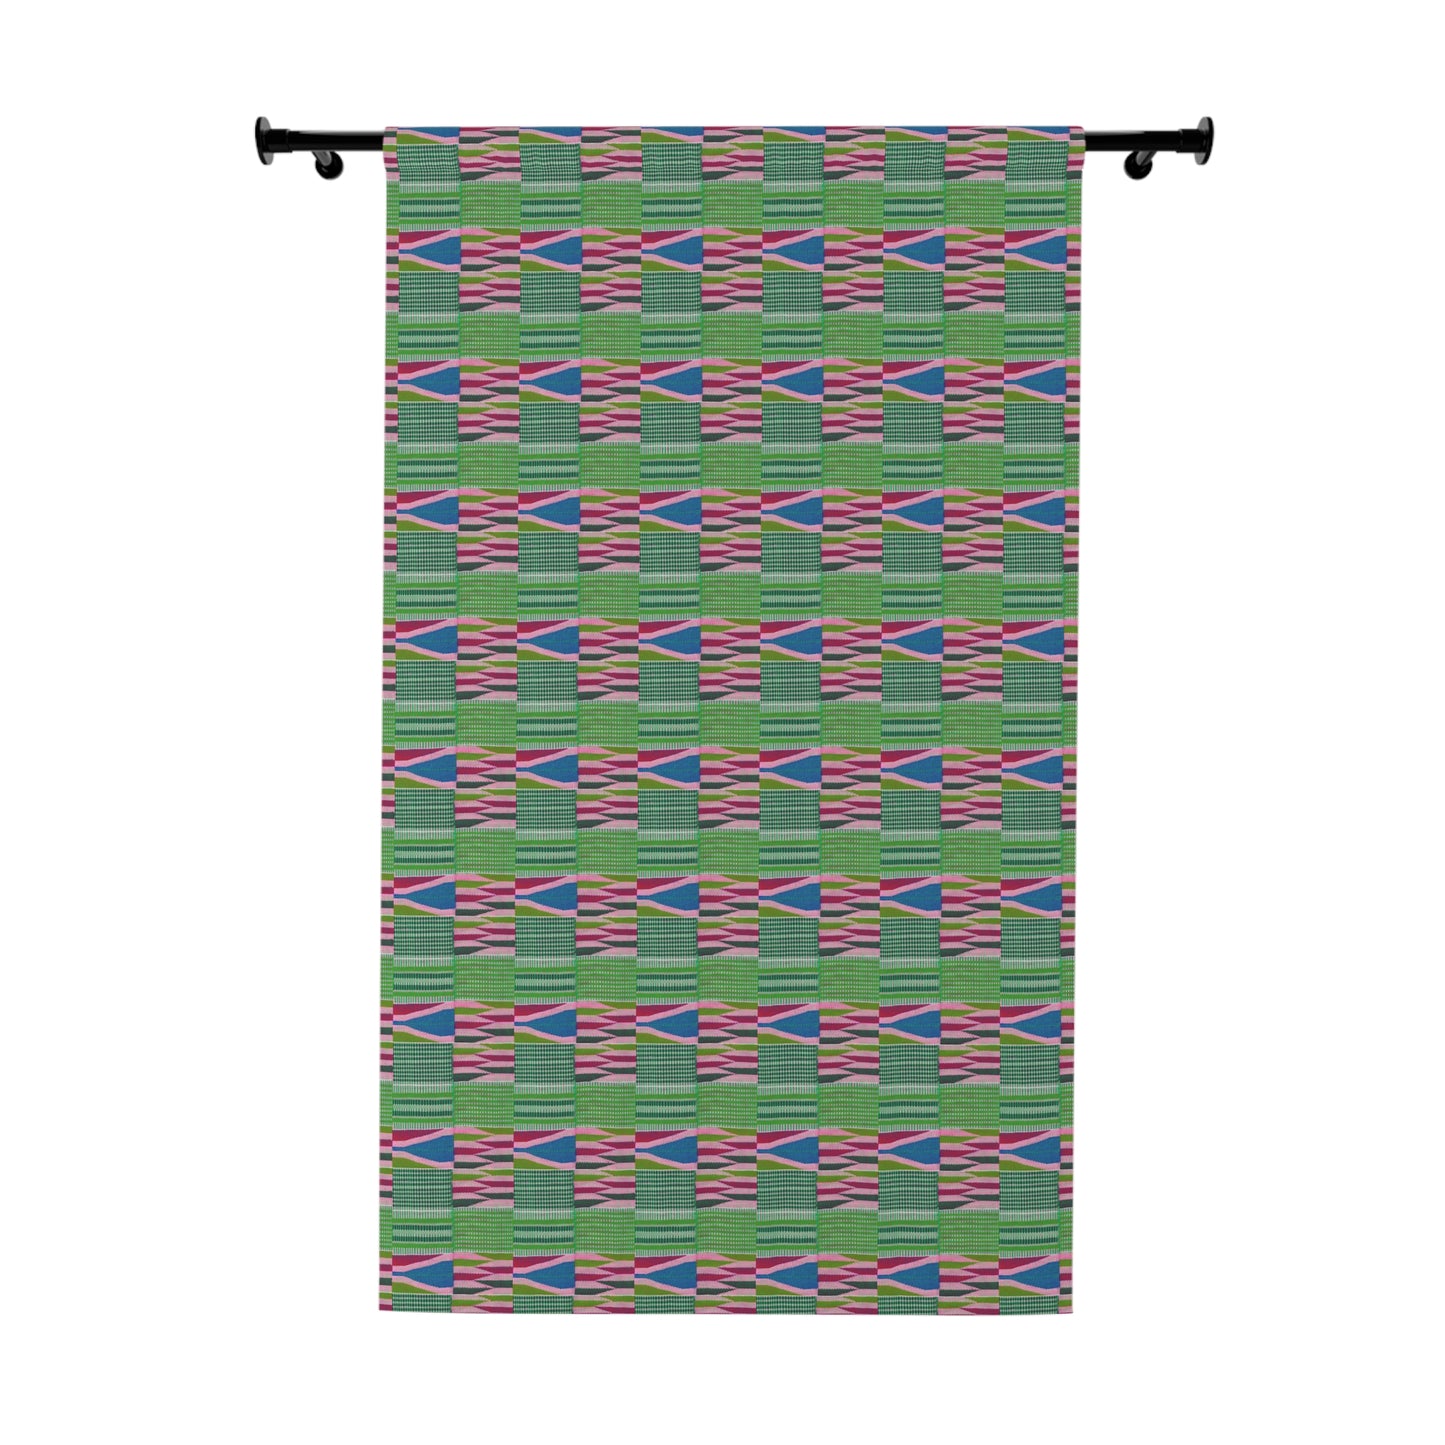 Boho Curtains in African Kente Cloth Inspired - Pink and Green